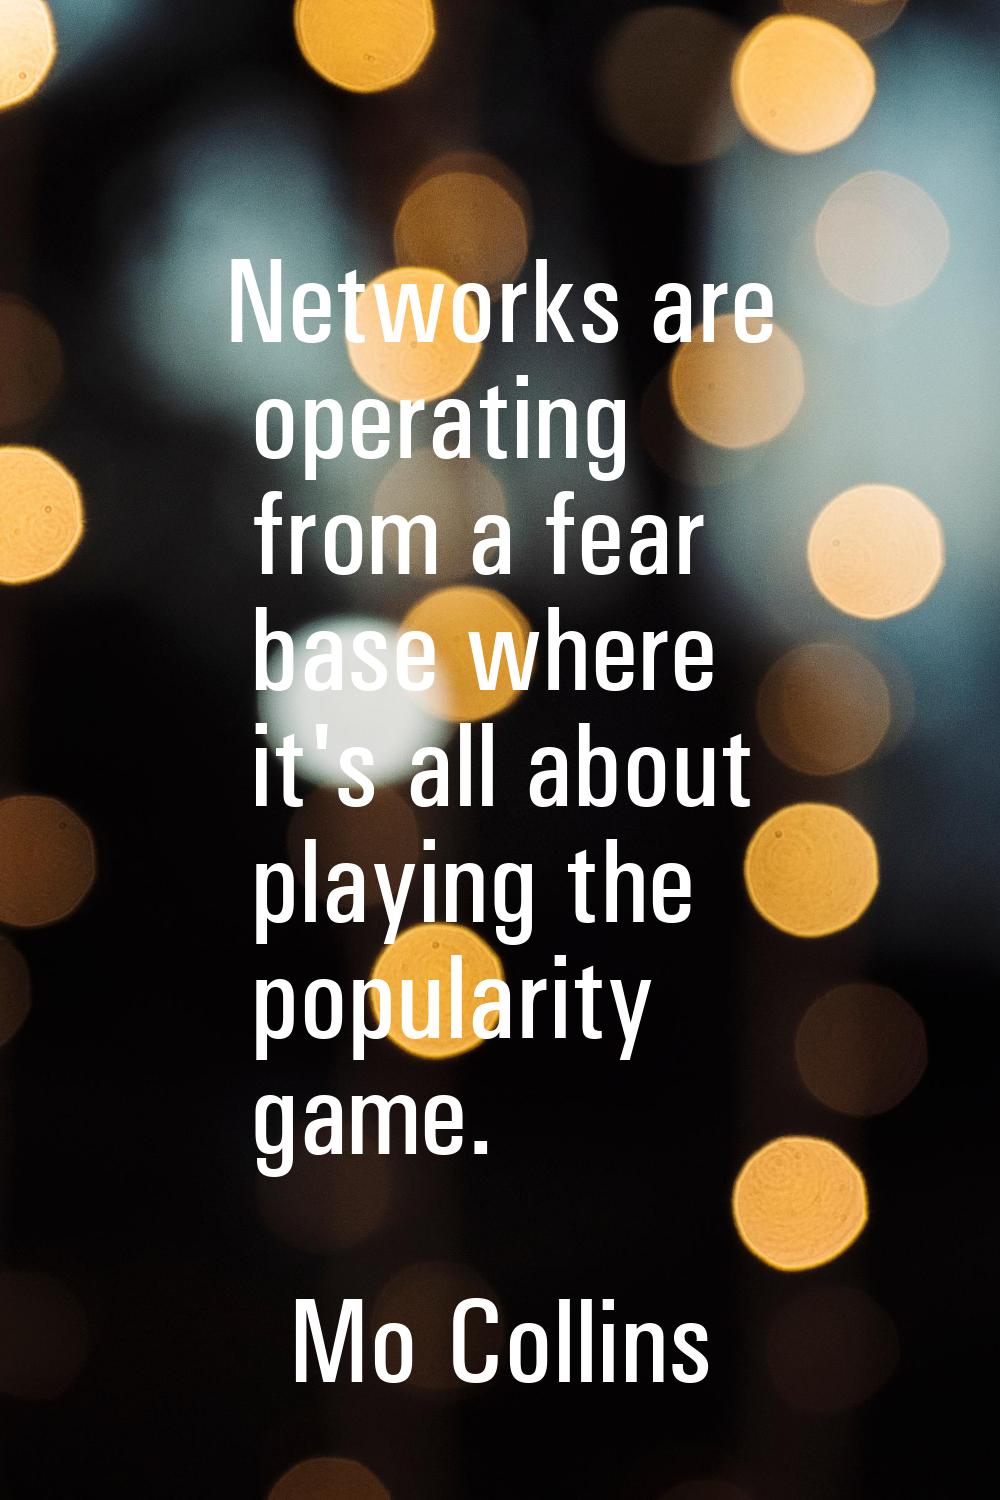 Networks are operating from a fear base where it's all about playing the popularity game.